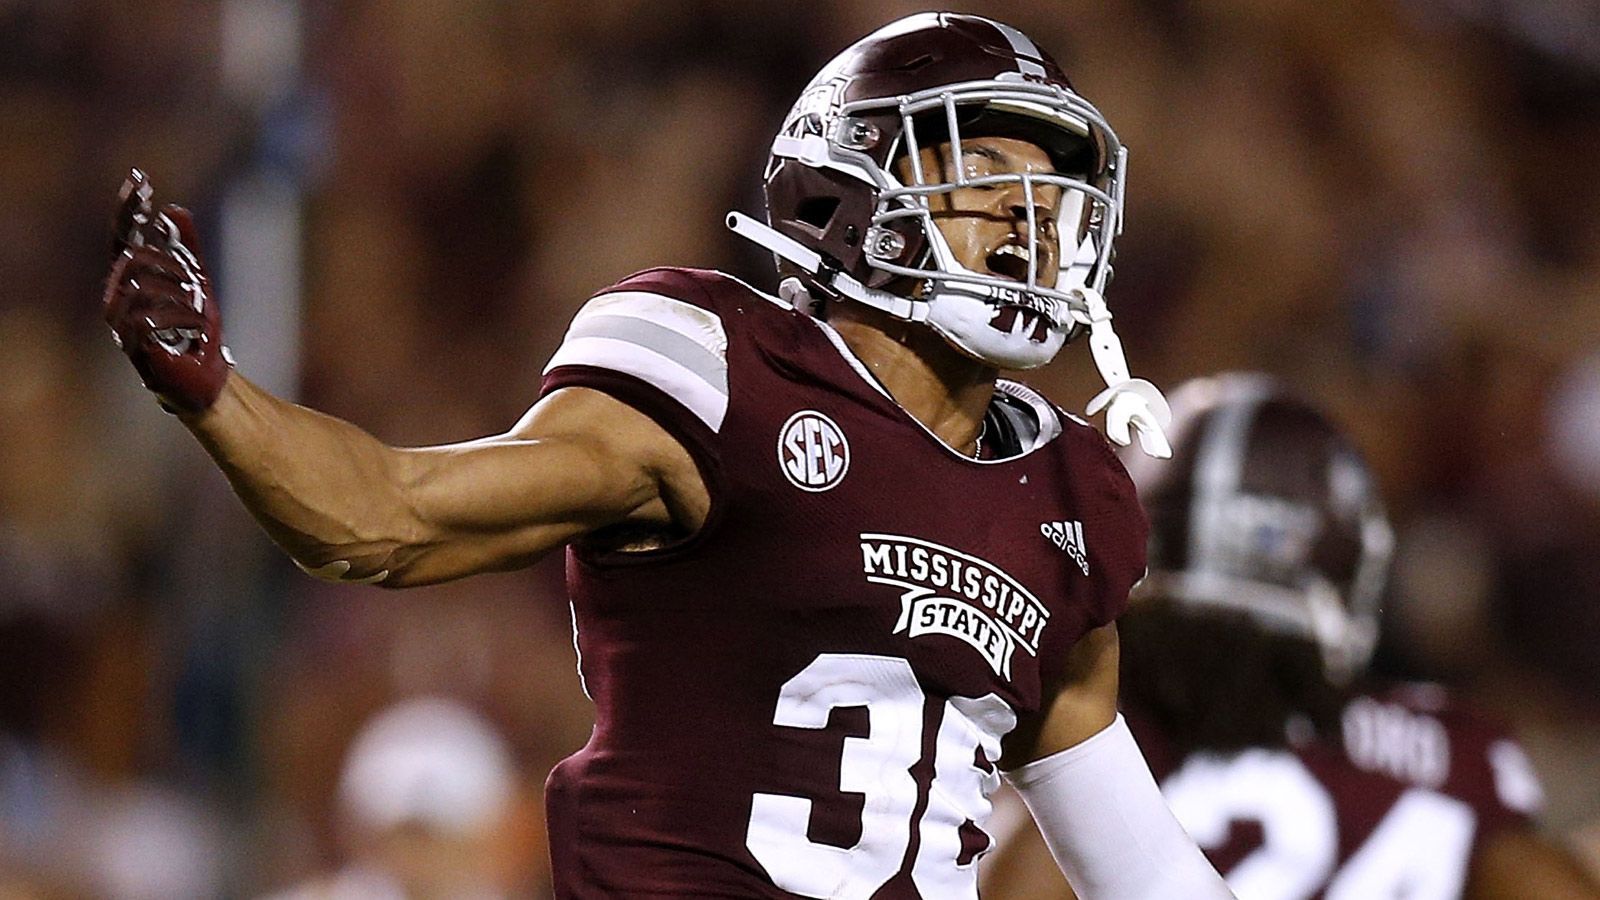 
                <strong>Draft Pick 27: Oakland Raiders (durch Trade mit Dallas Cowboys)</strong><br>
                Spieler: Johnathan AbramPosition: SafetyCollege: Mississippi State
              